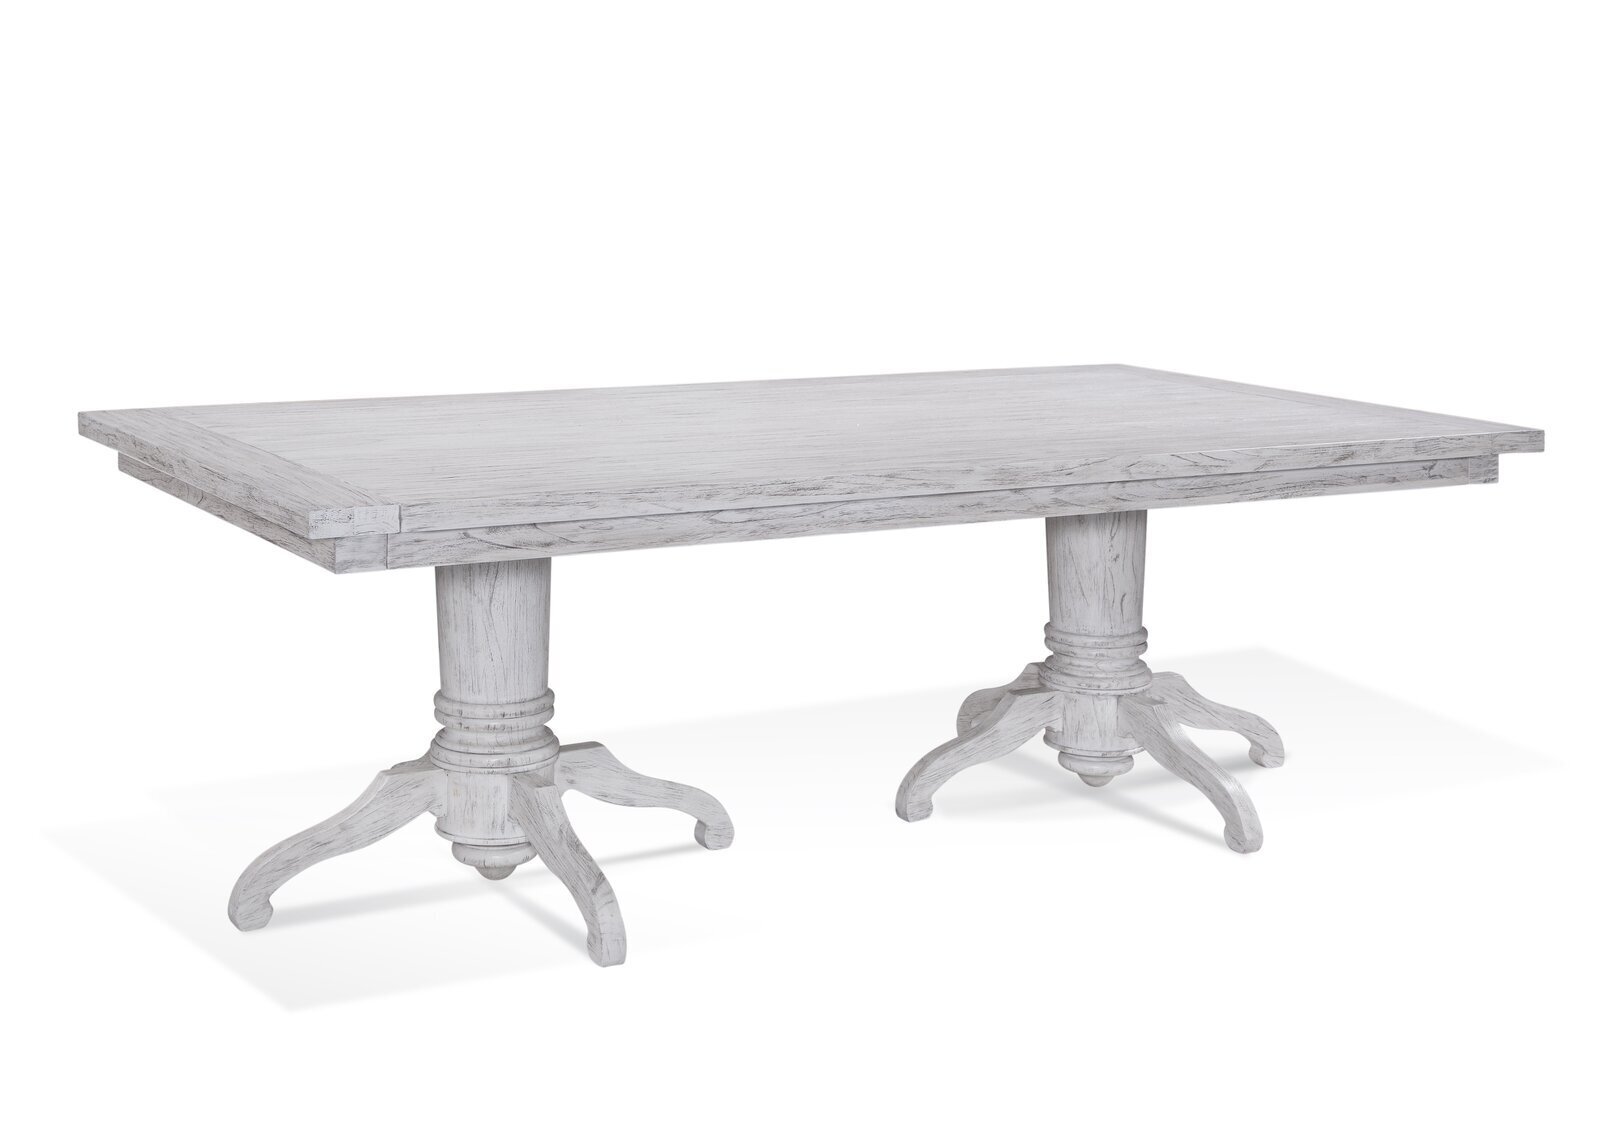 Double Pedestal Rustic White Dining Table